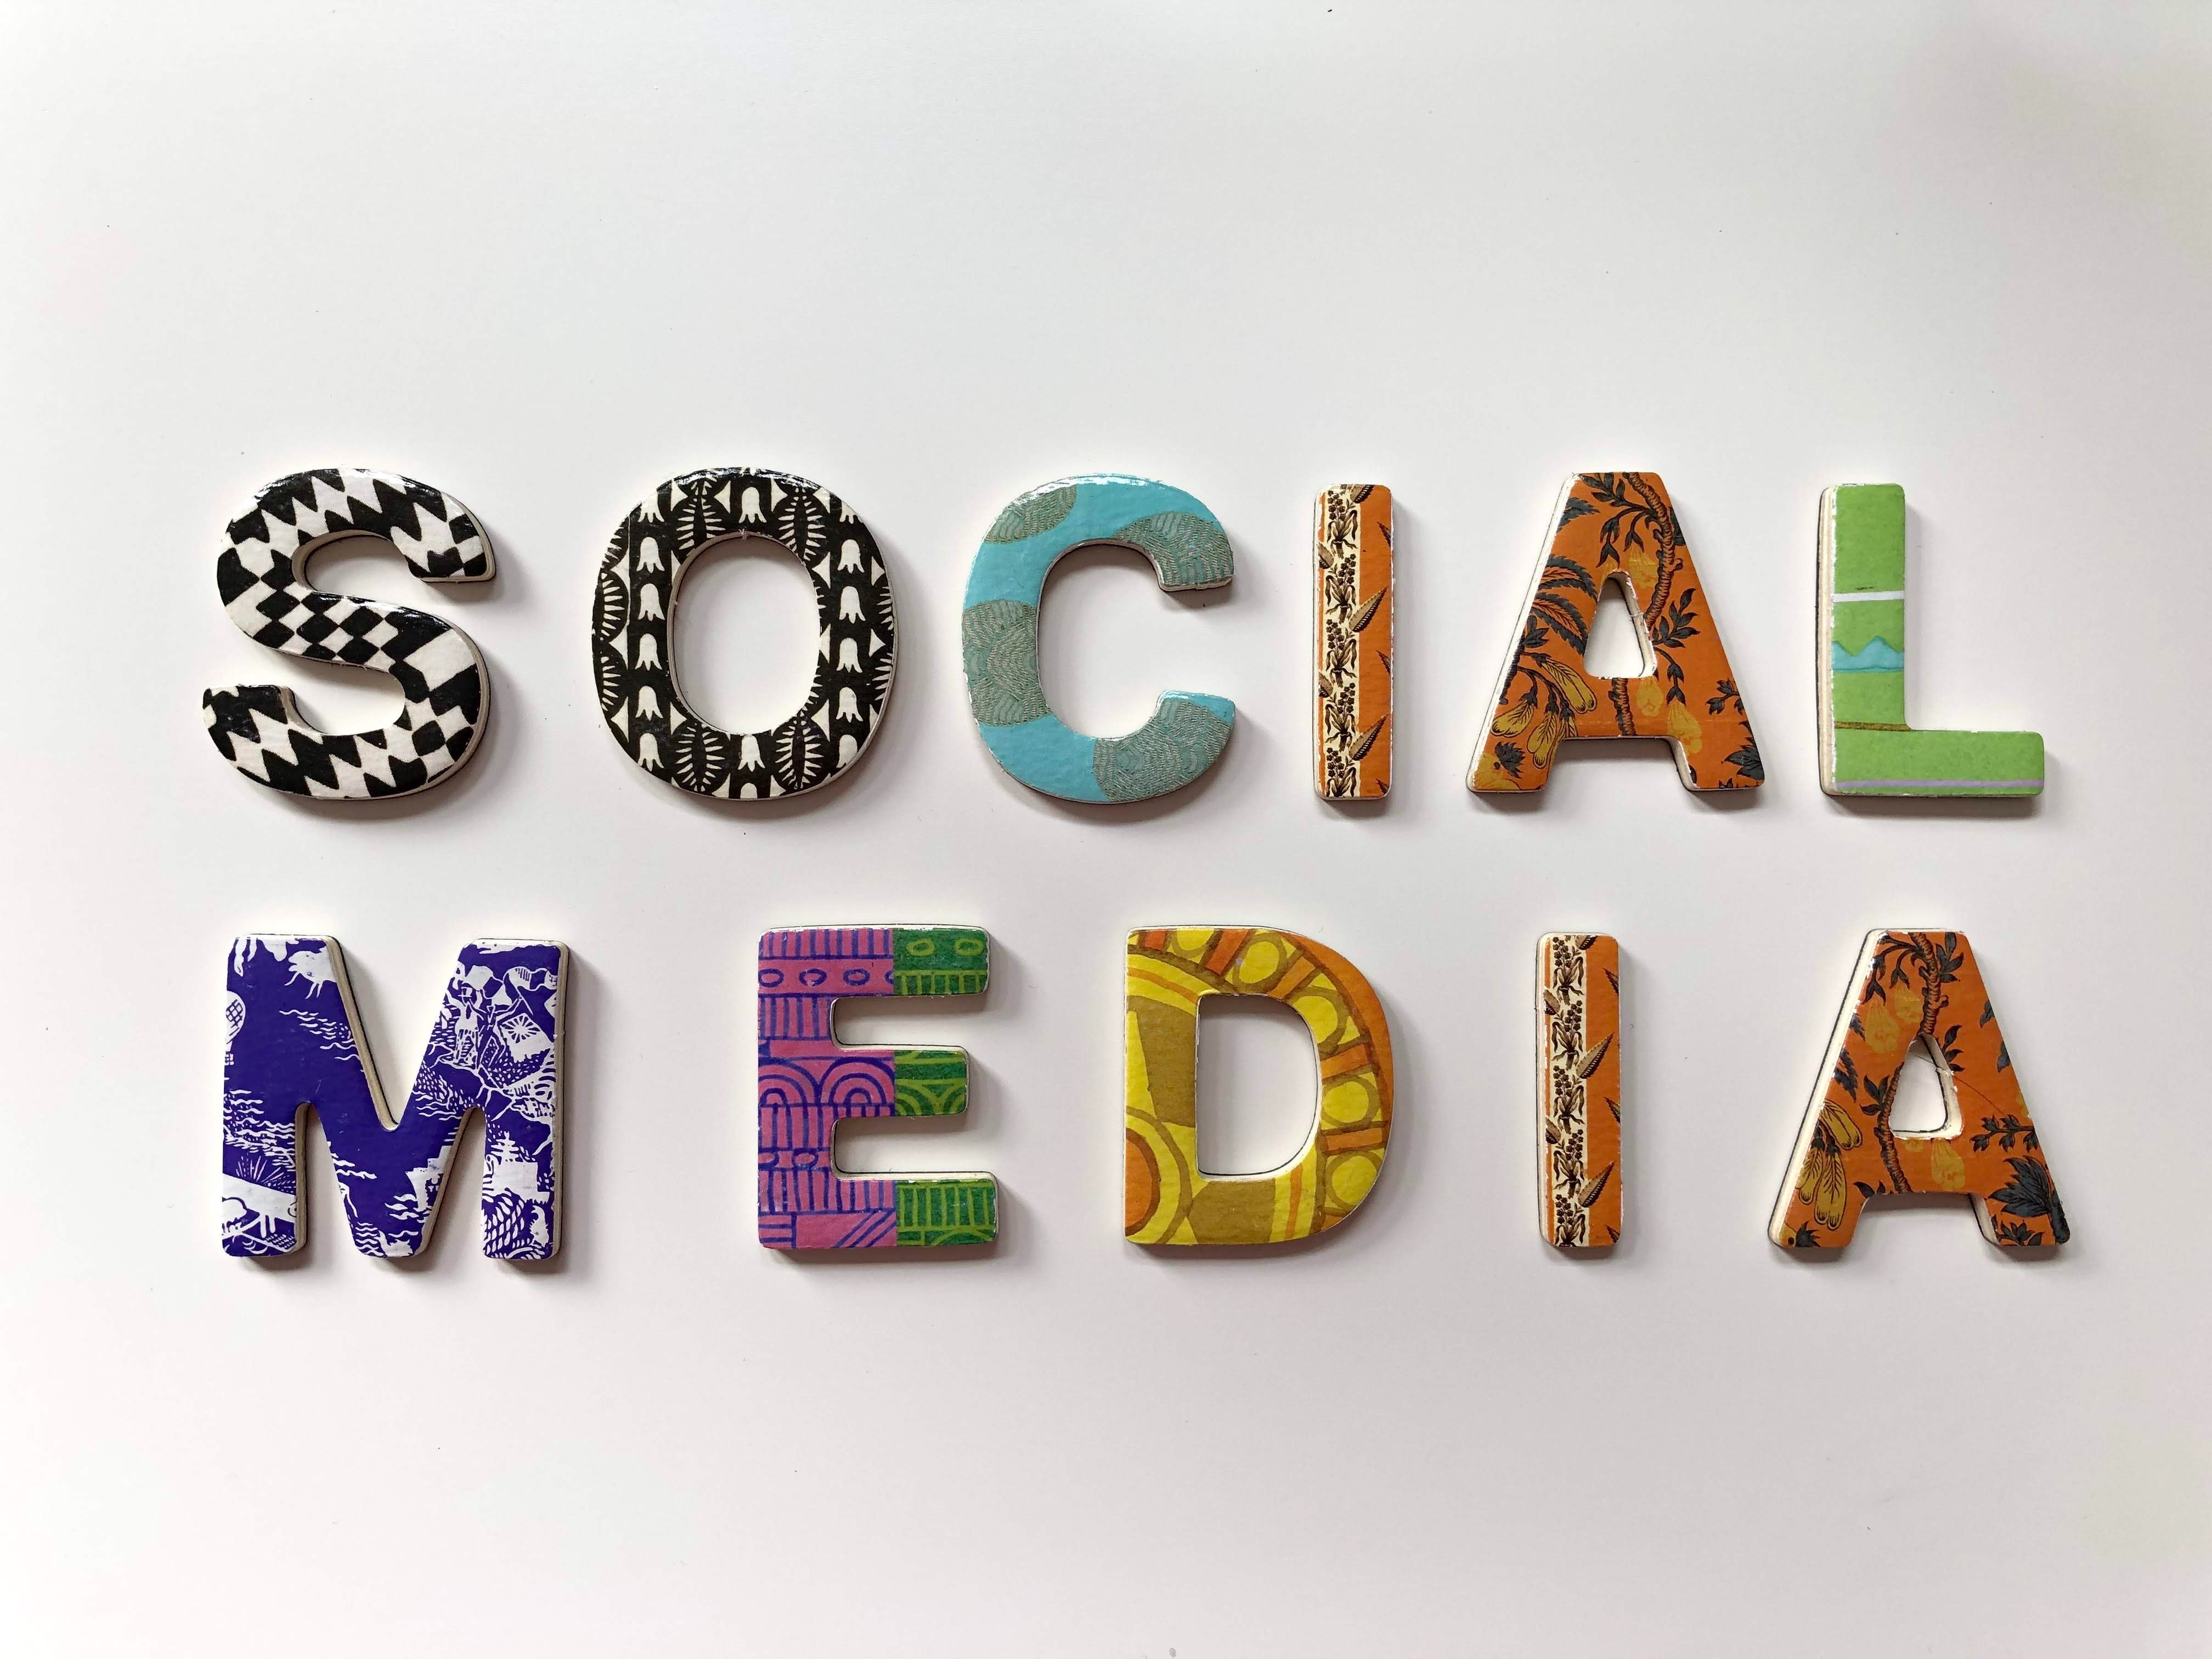 the words "social media" in pottery on a wall